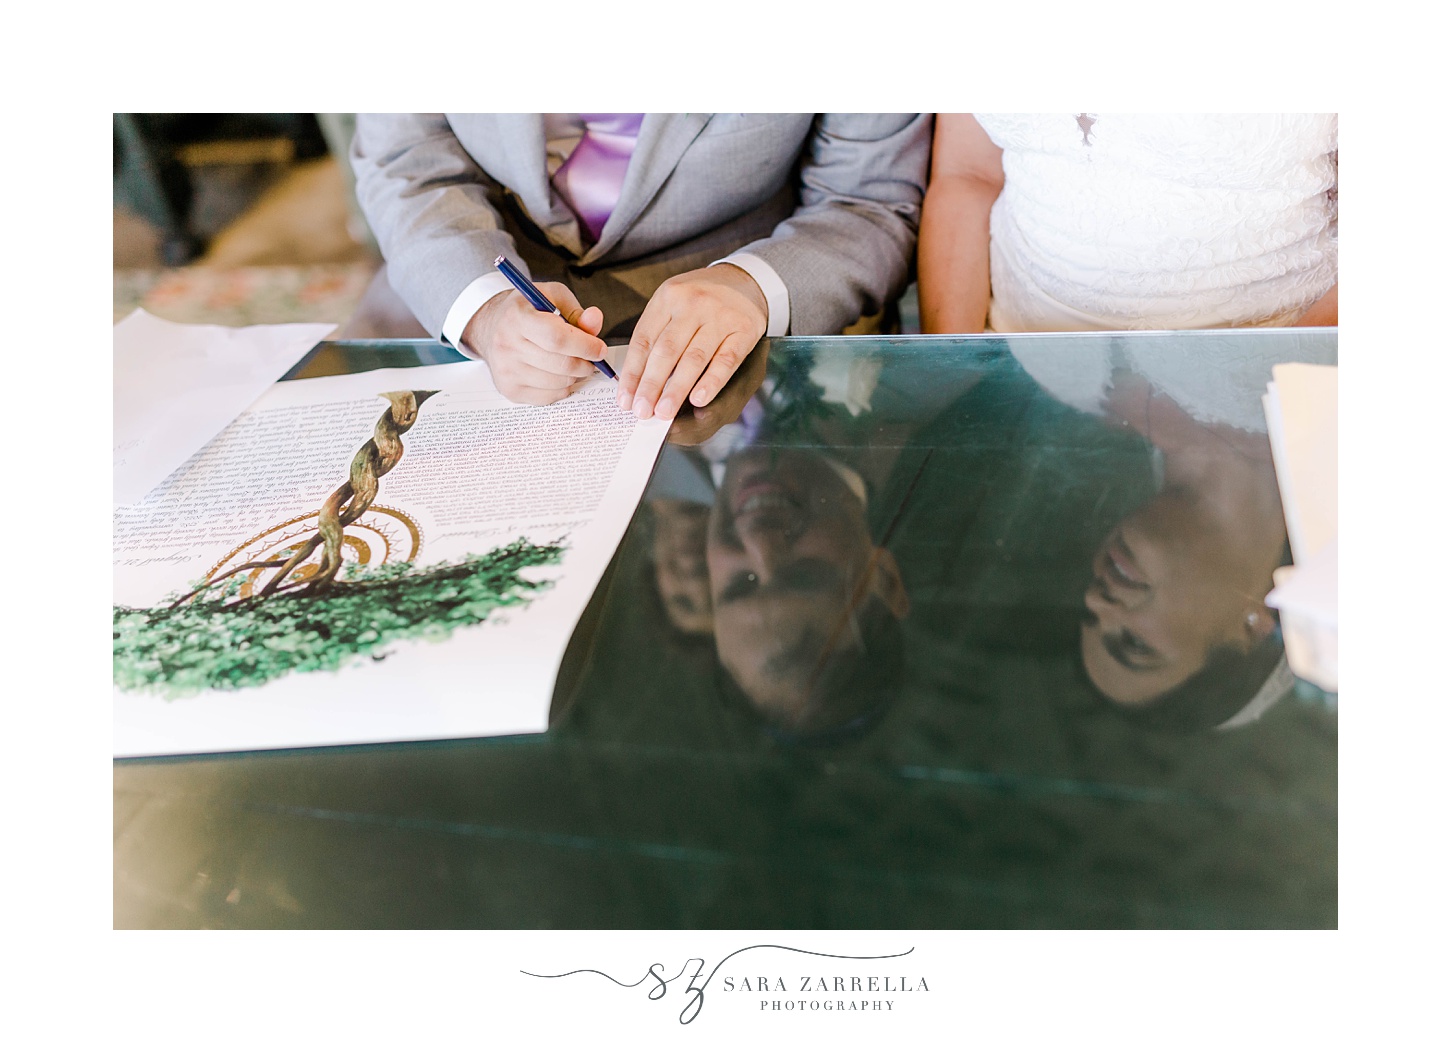 groom signs Ketubah with bride next to him